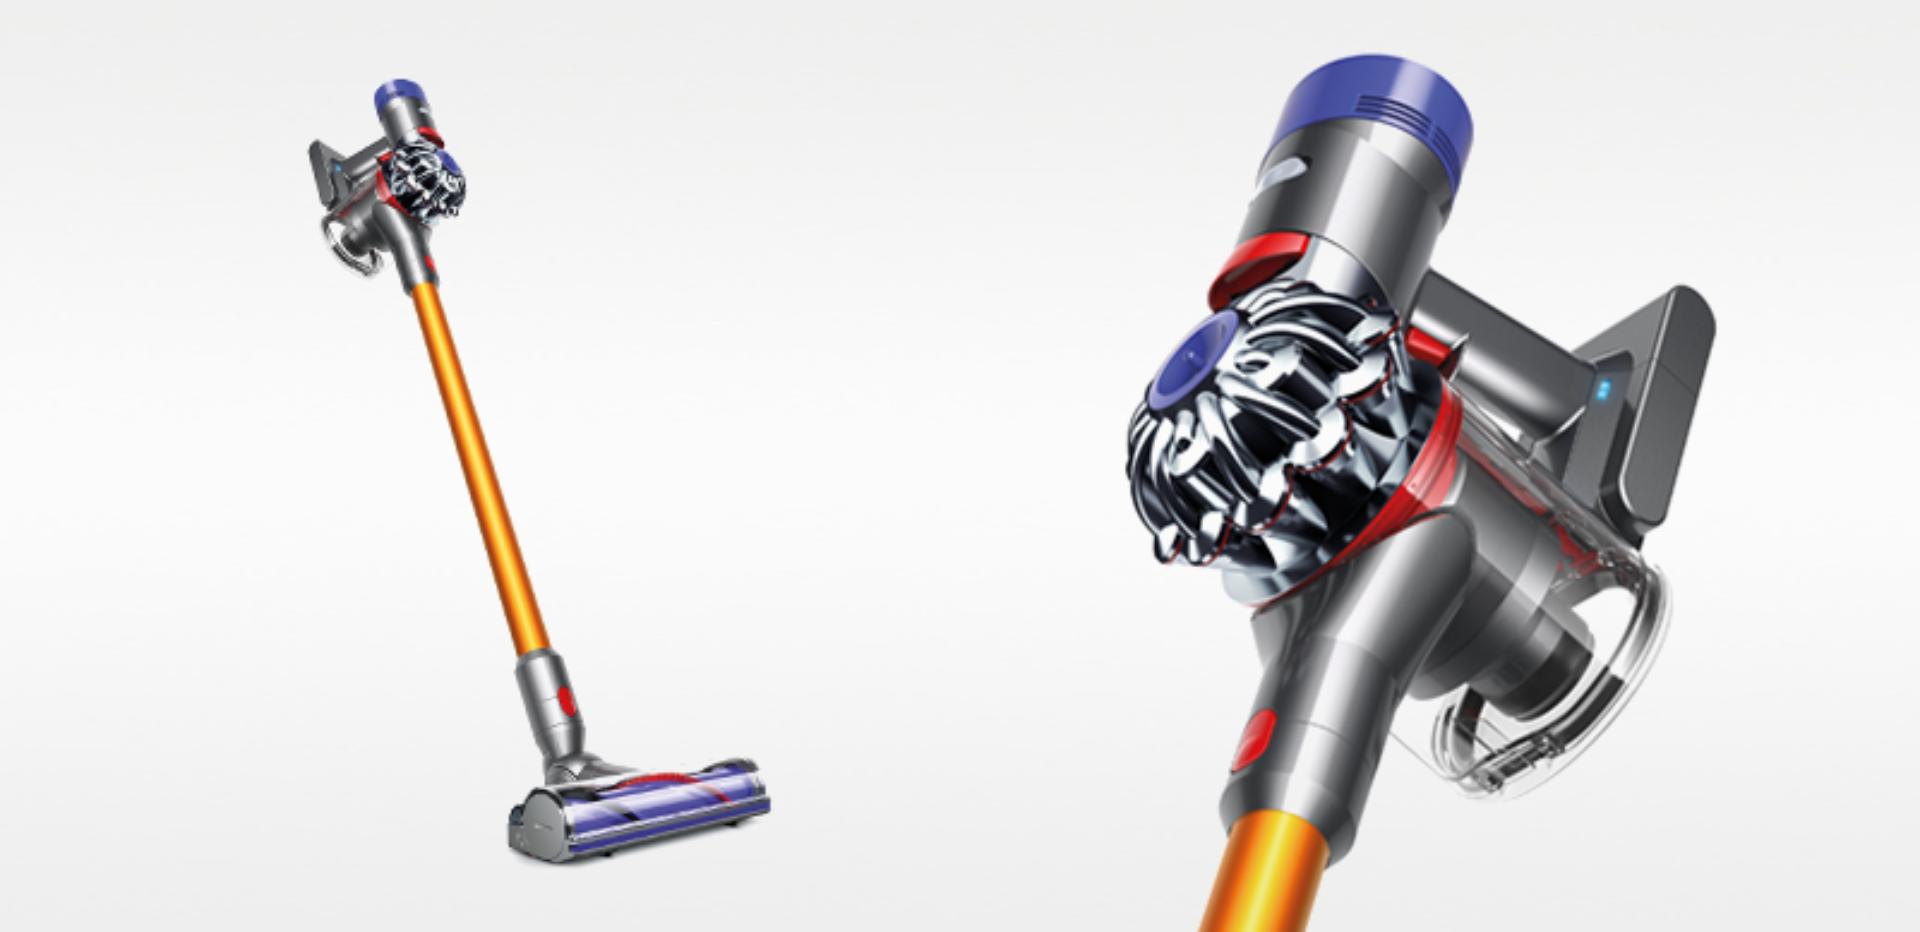 Dyson V8 absolute+